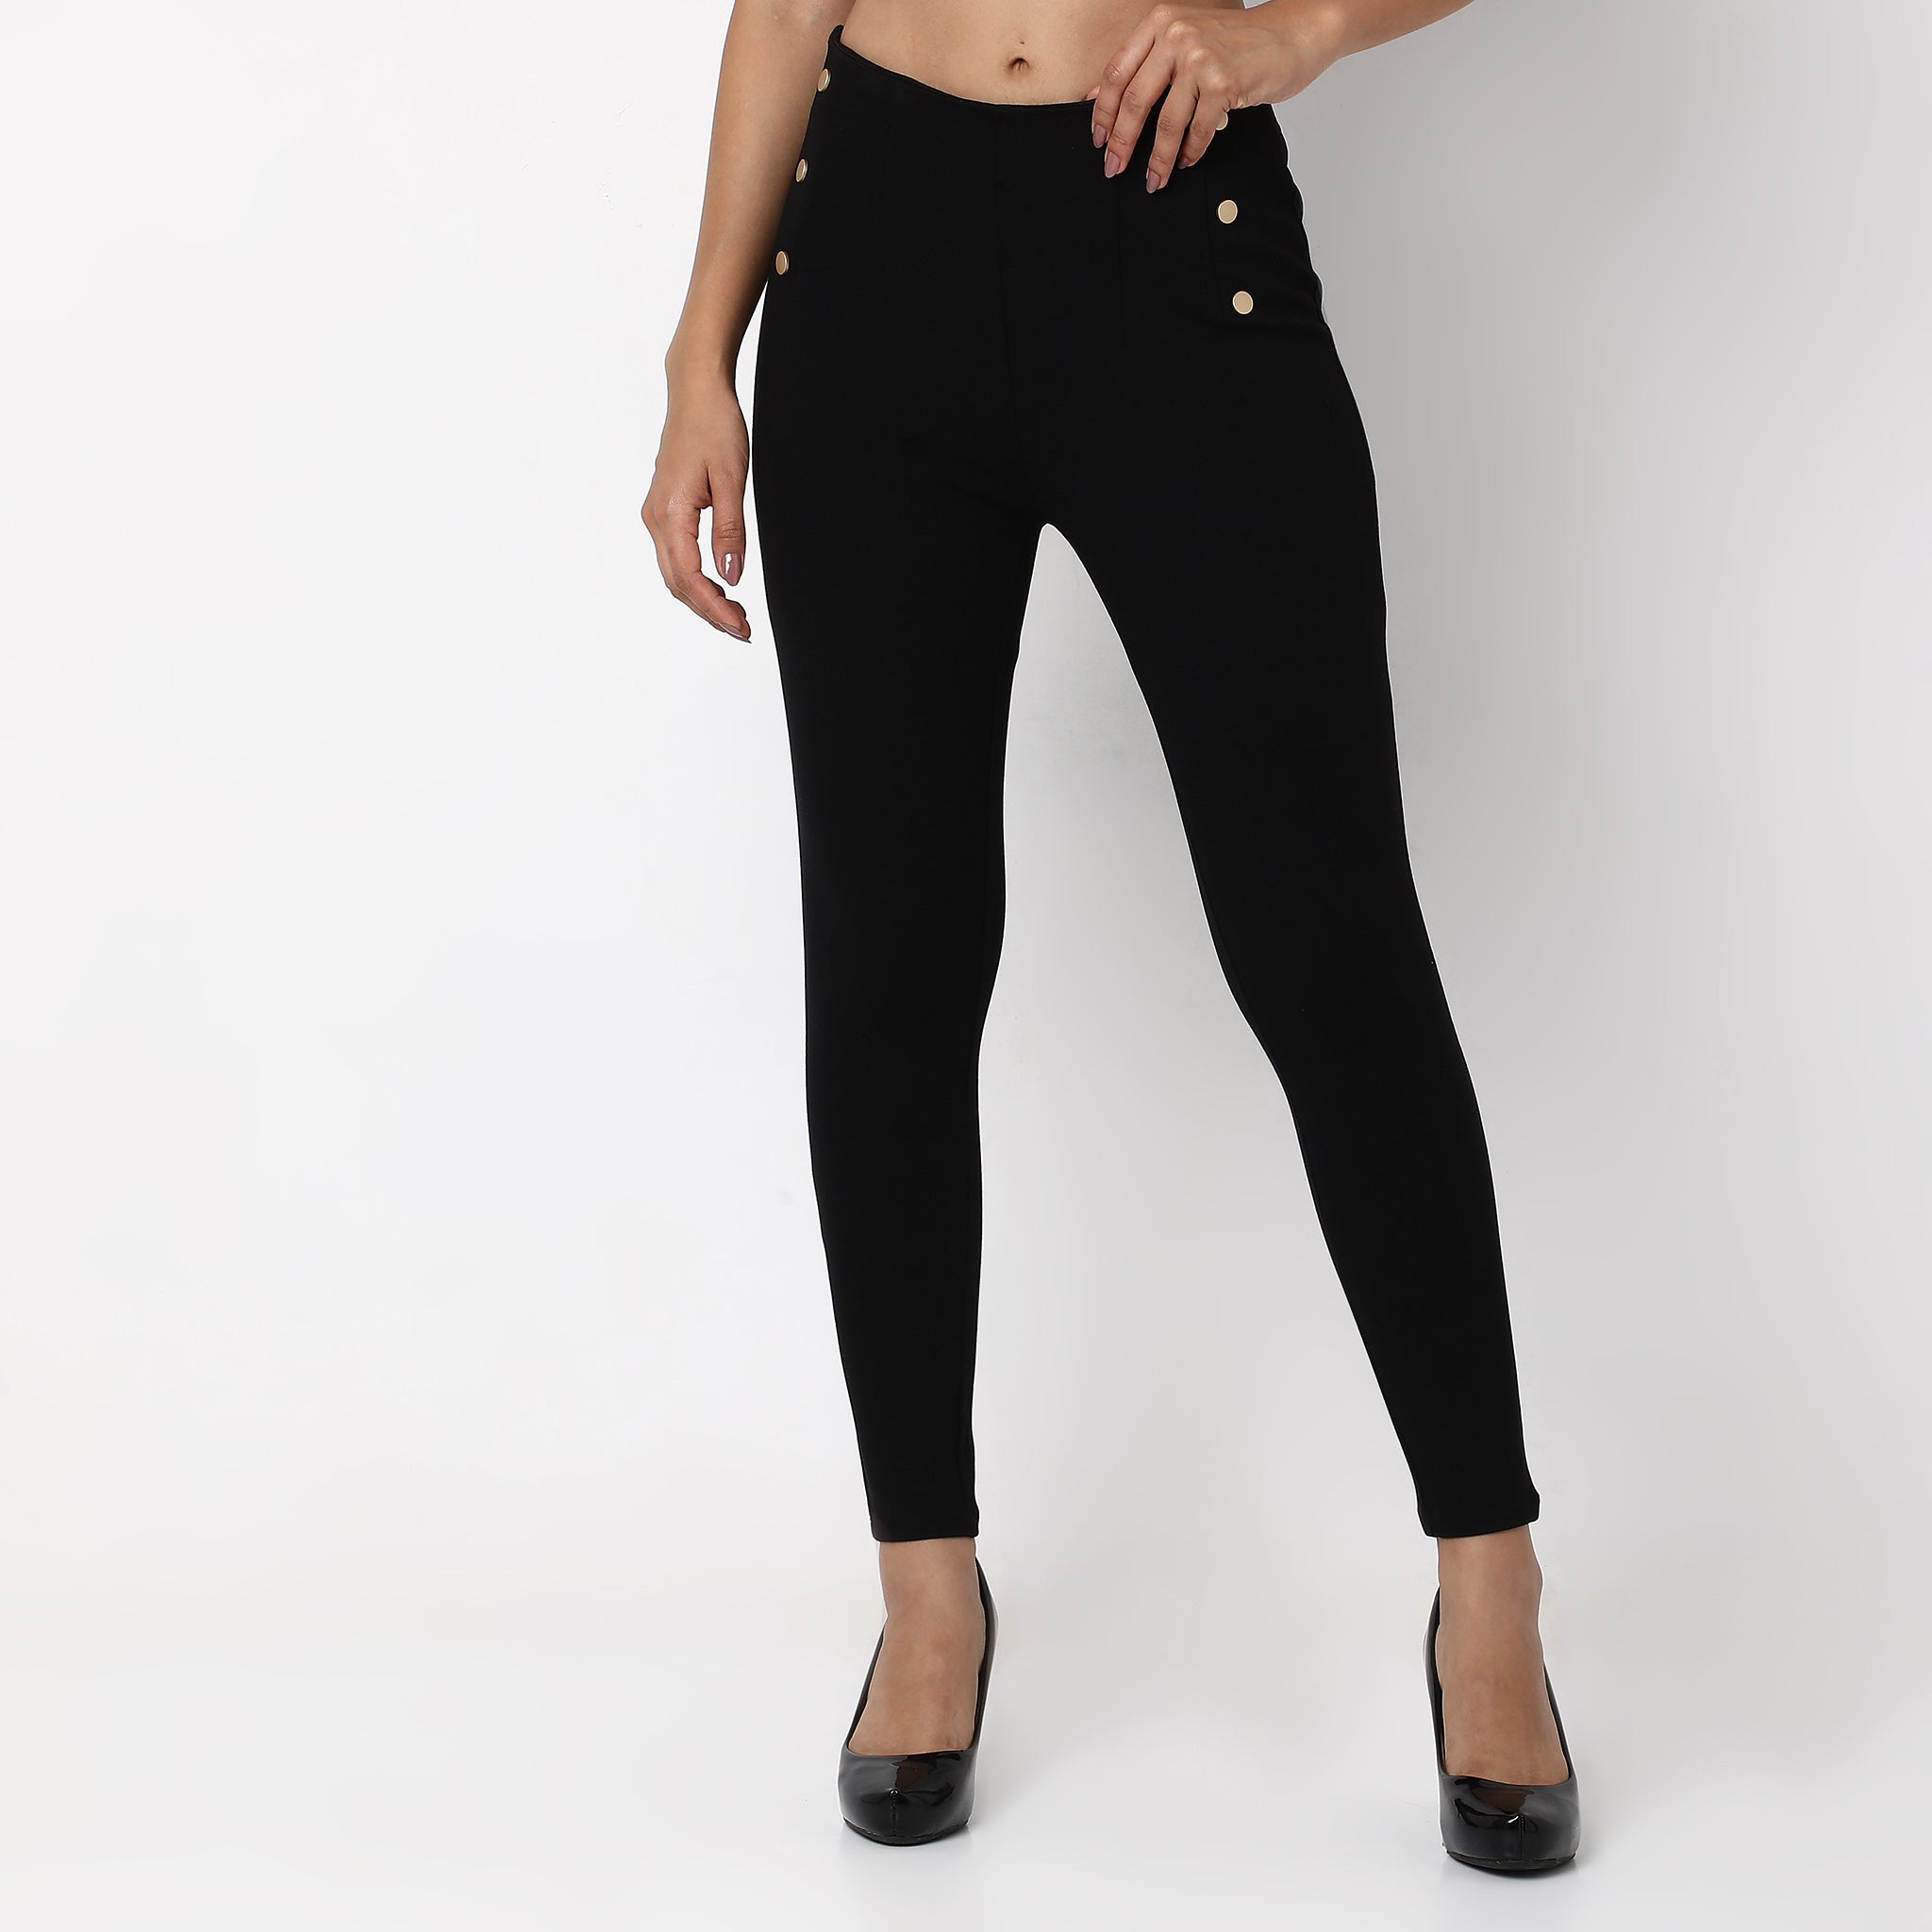 Buy Skinny Fit Printed Mid Rise Jeggings - Style Union